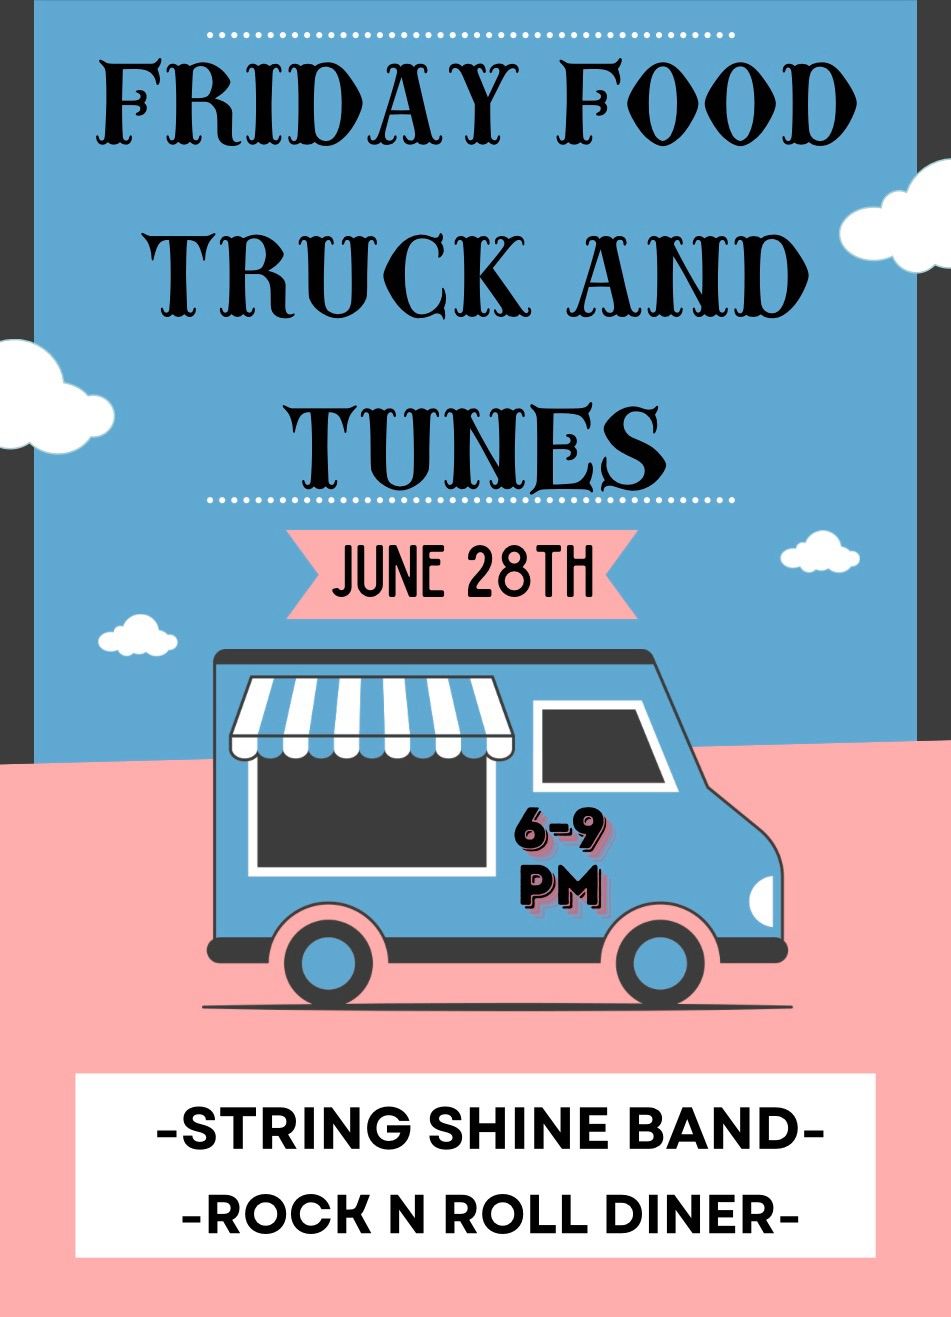 Friday Food Truck and Tunes!